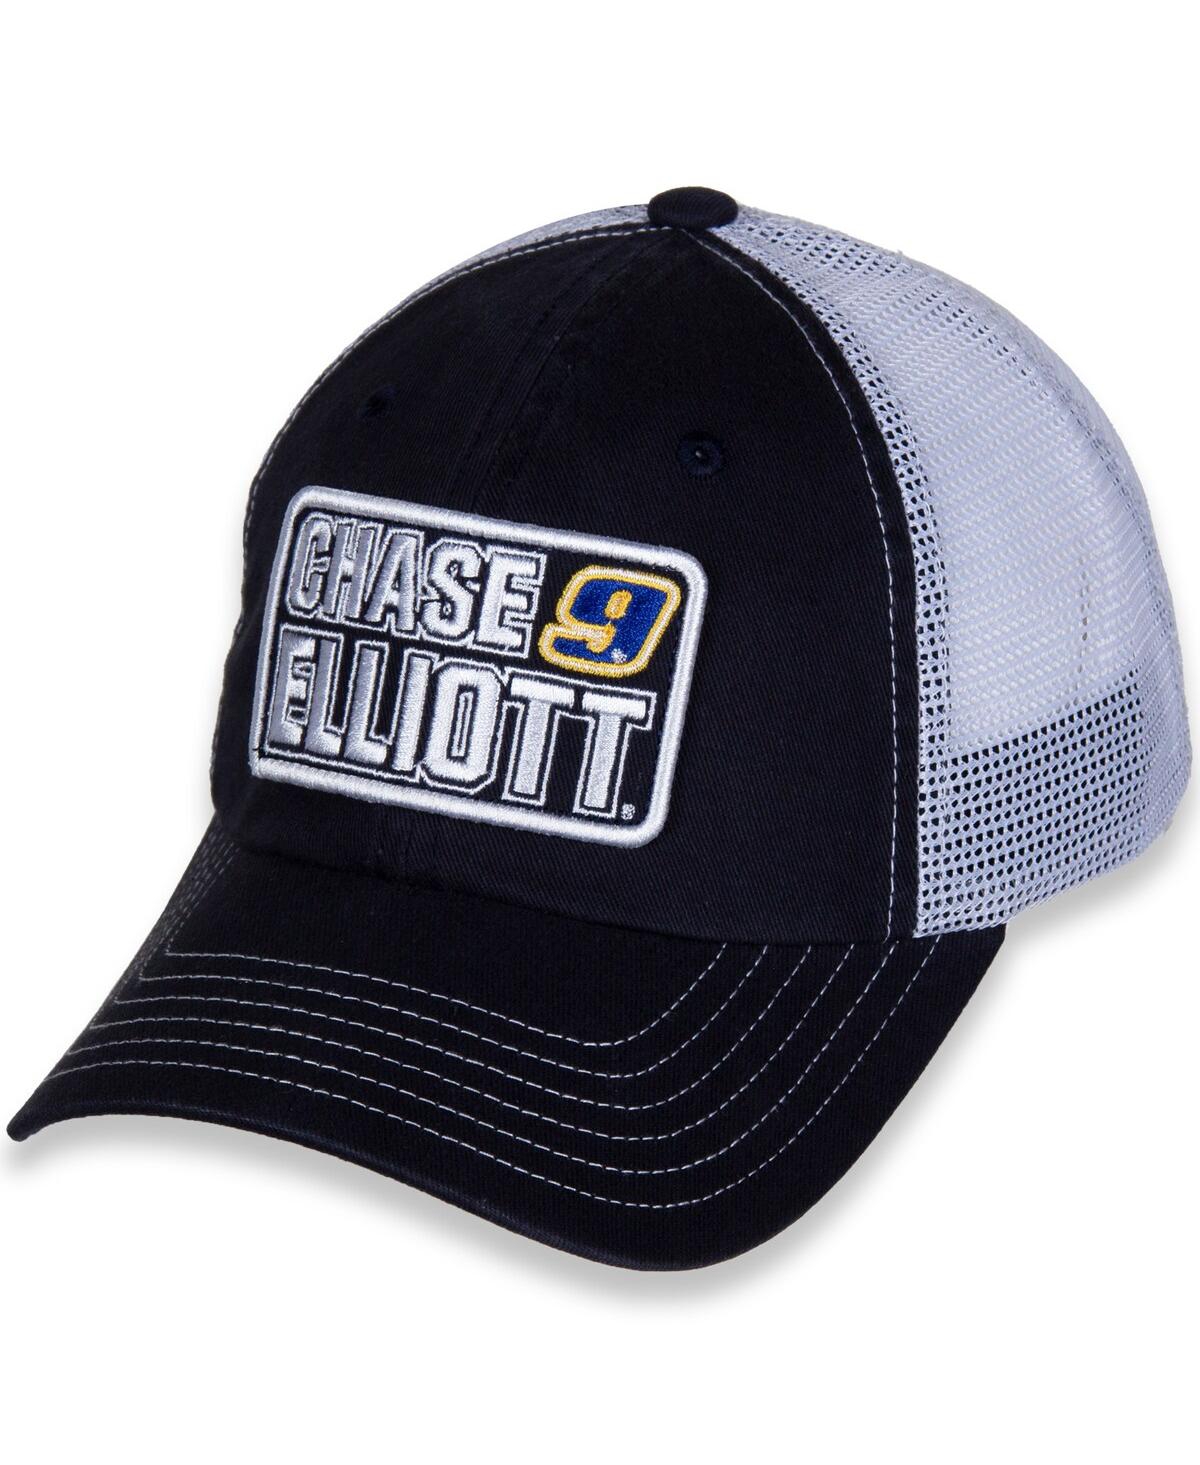 Women's Hendrick Motorsports Team Collection Black and White Chase Elliott Name and Number Patch Adjustable Hat - Black, White